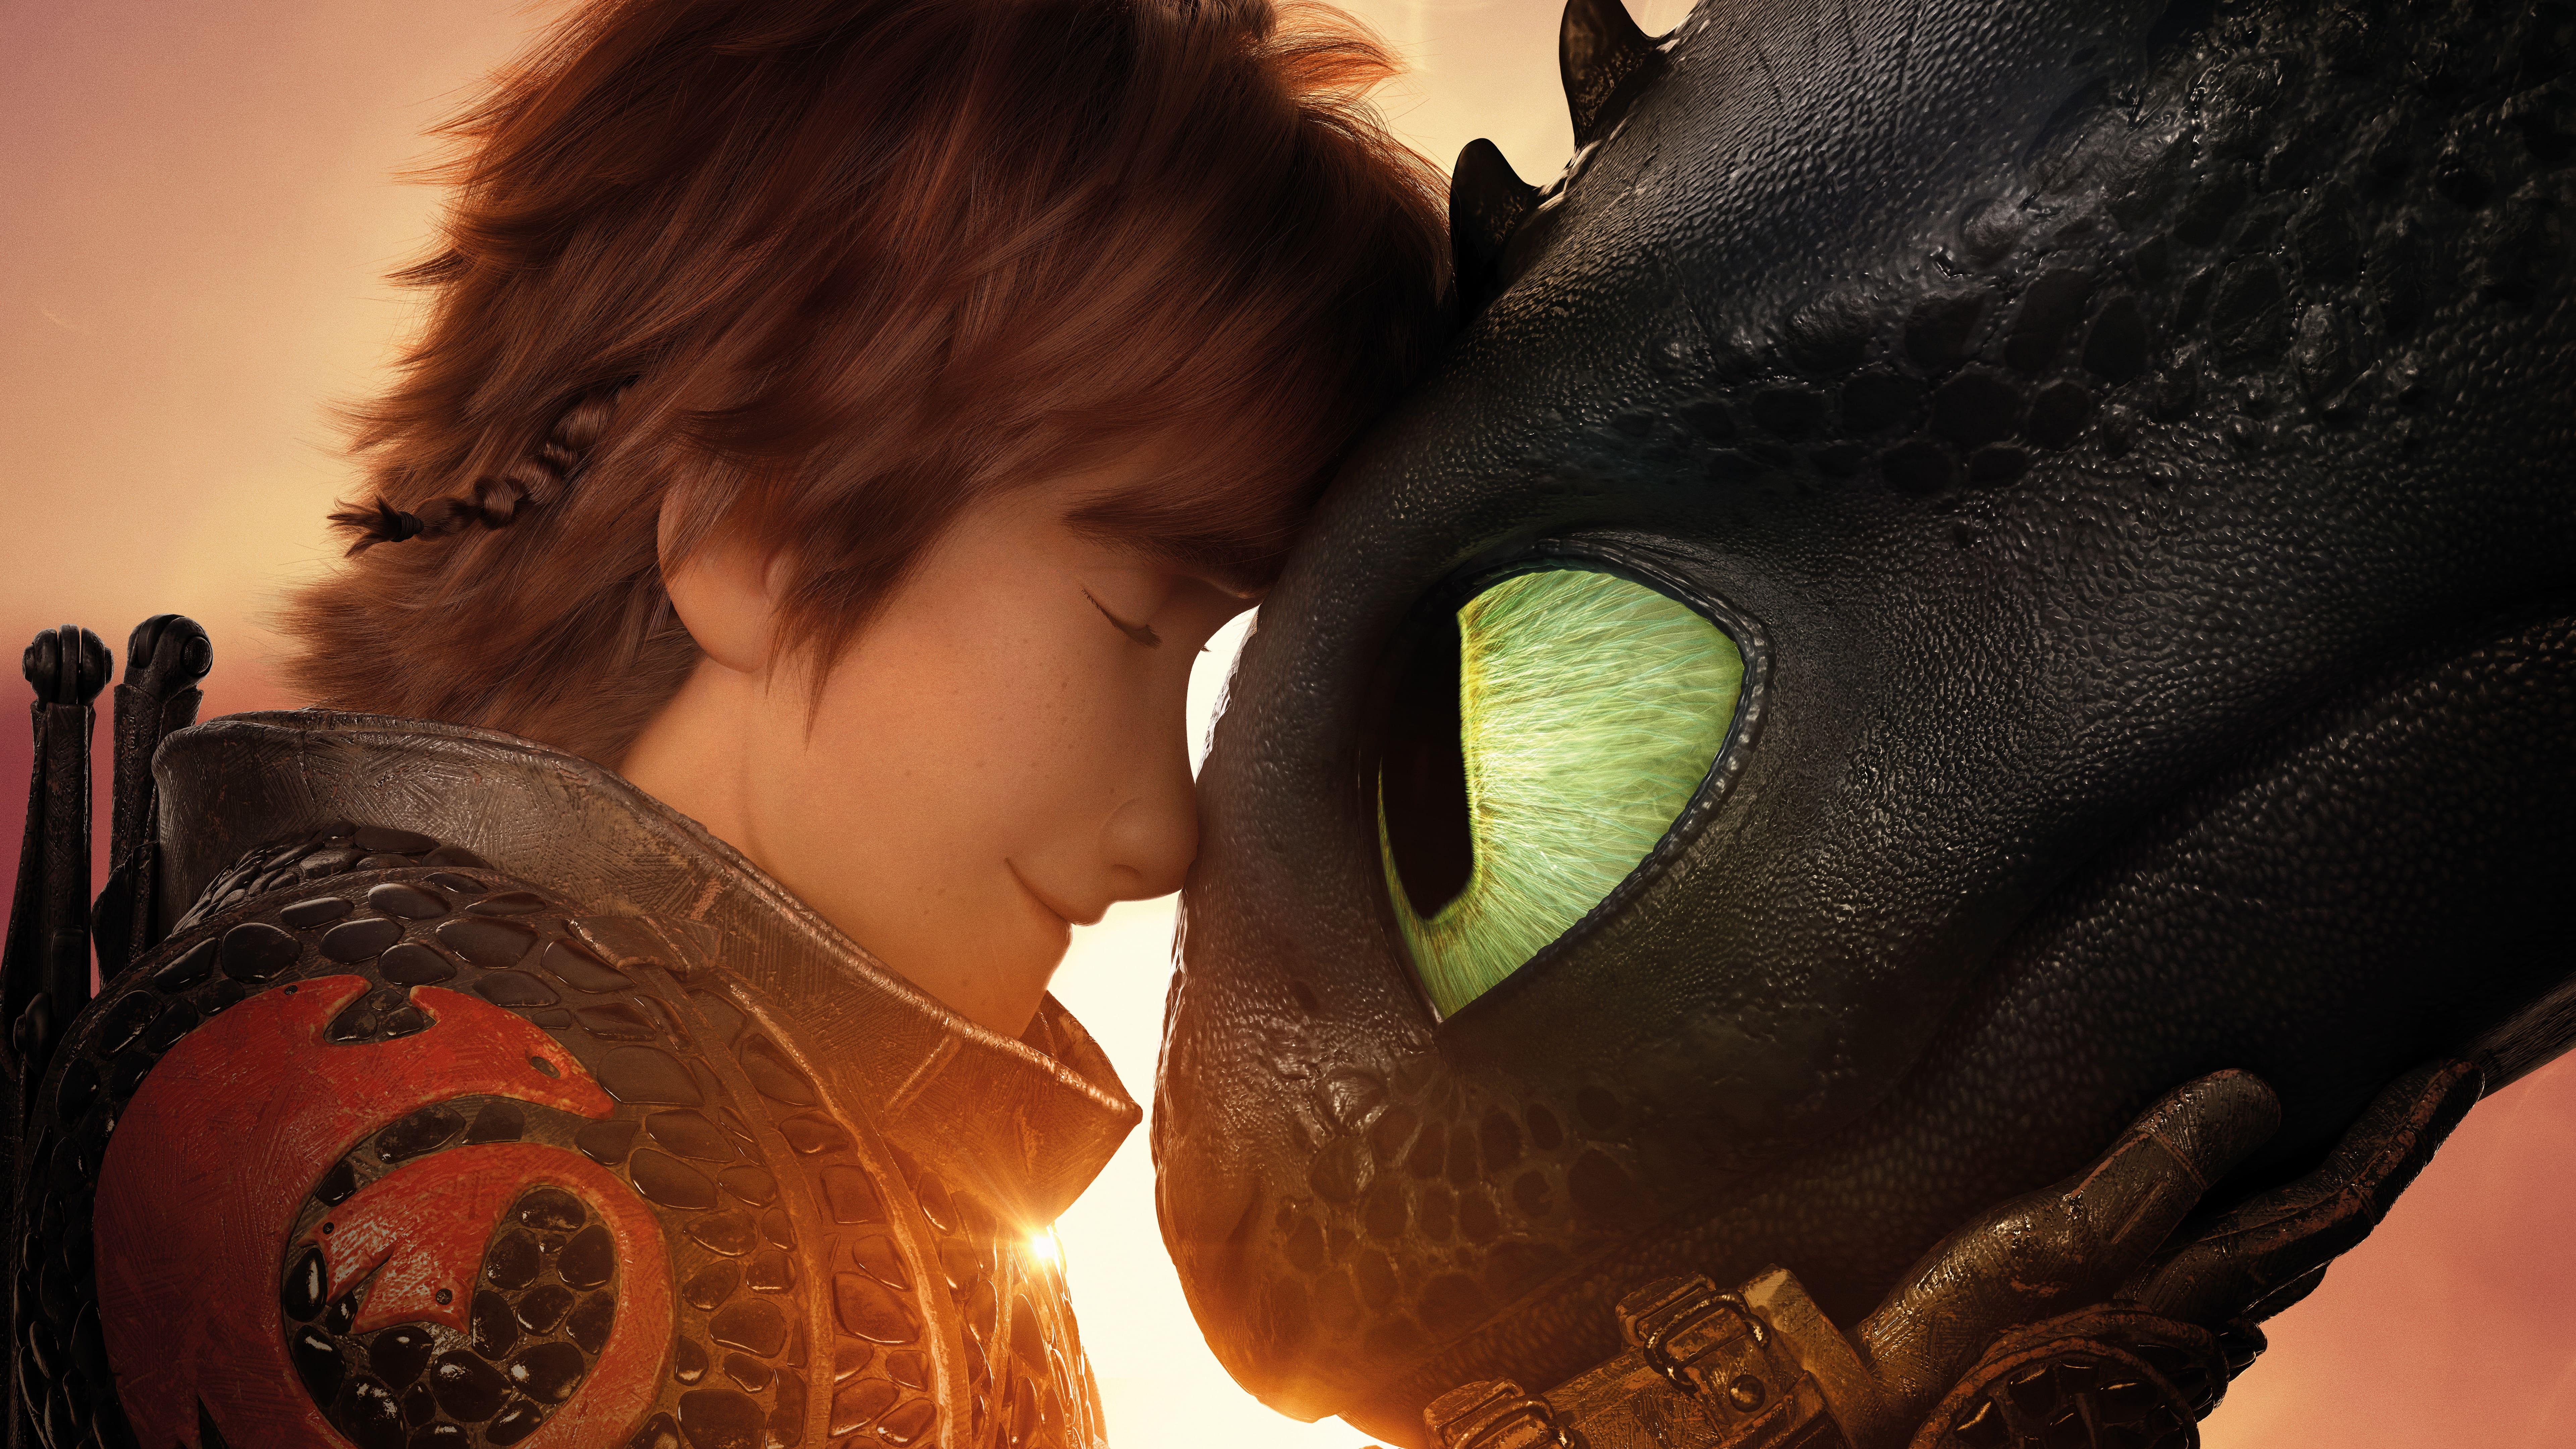 Wallpaper of Hiccup, Toothless, How to Train Your Dragon